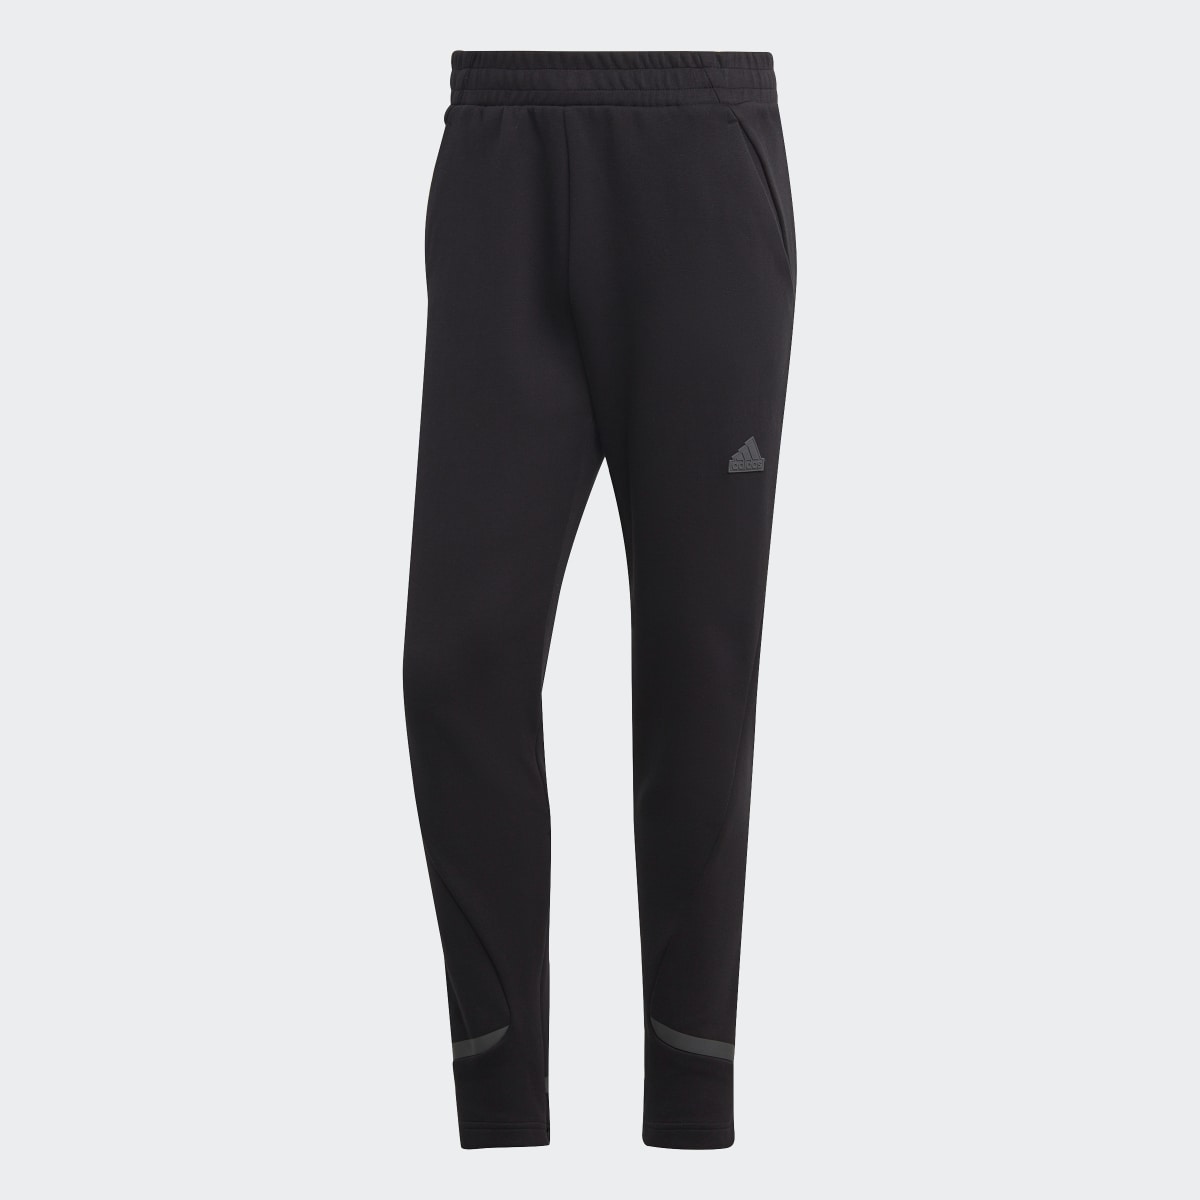 Adidas Designed for Gameday Pants. 5